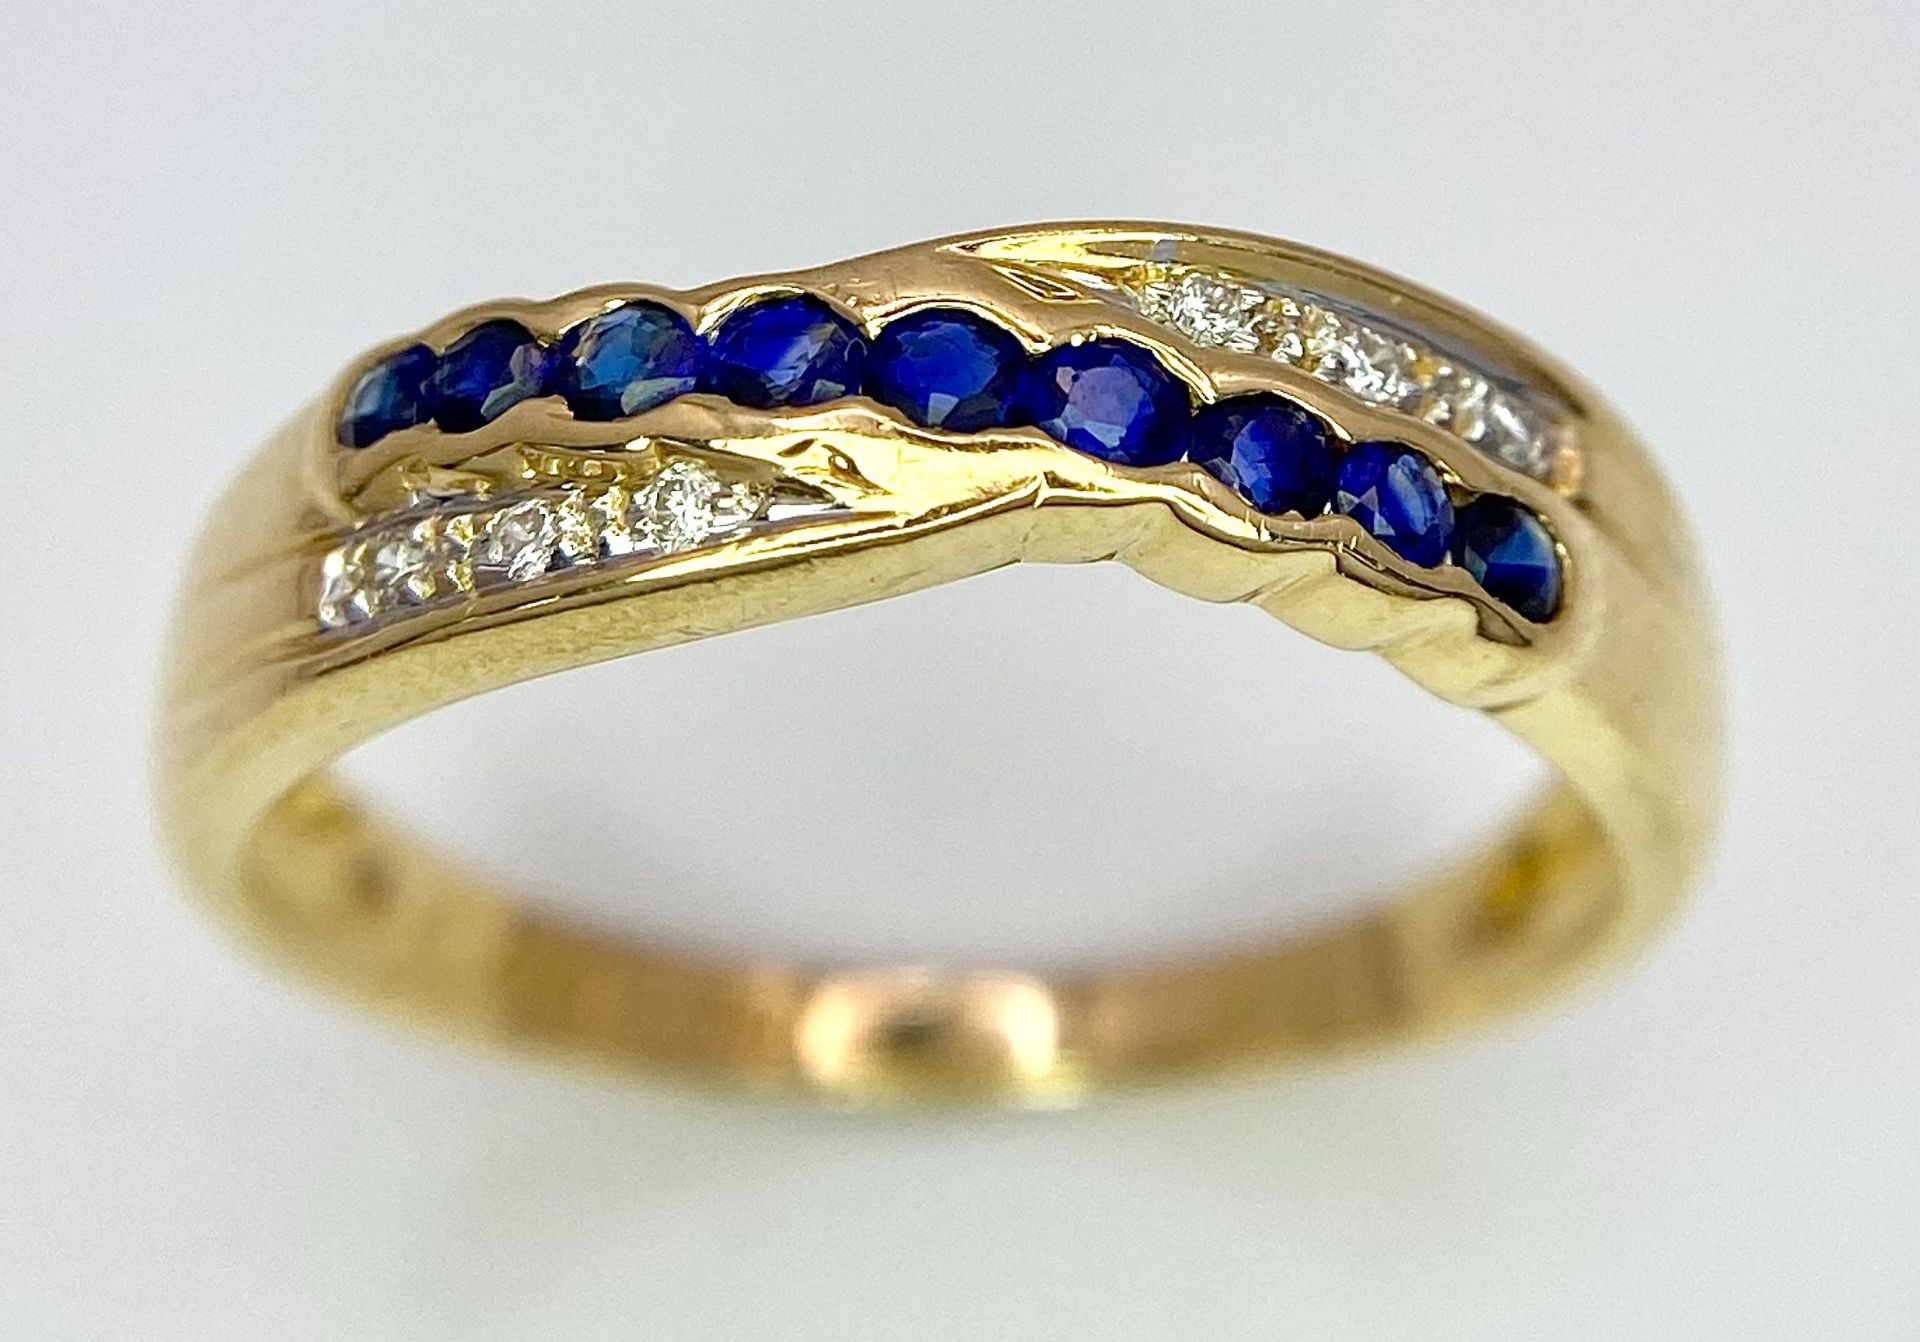 AN 18K YELLOW GOLD DIAMOND & BLUE STONE (PROBABLY SAPPHIRE) CROSSOVER RING. Size O, 2.7g total - Image 2 of 6